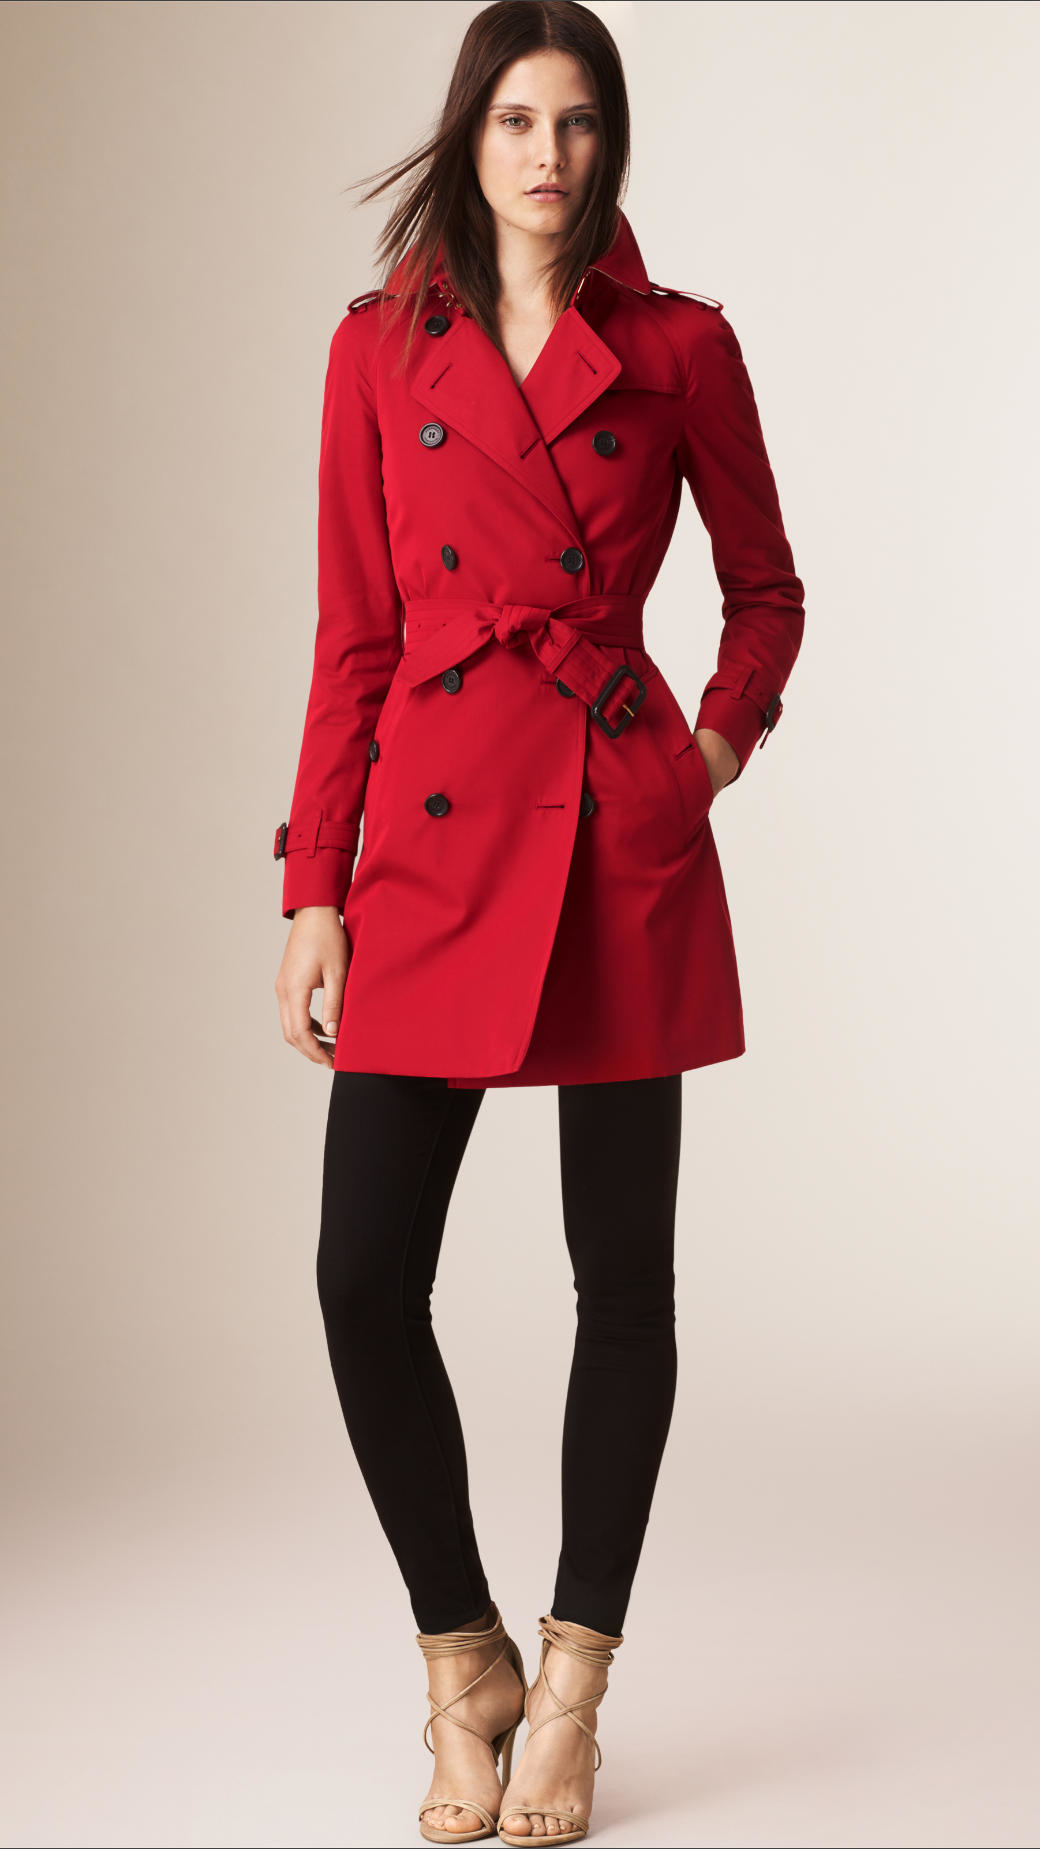 Lyst - Burberry The Westminster - Mid-length Heritage Trench Coat in Red